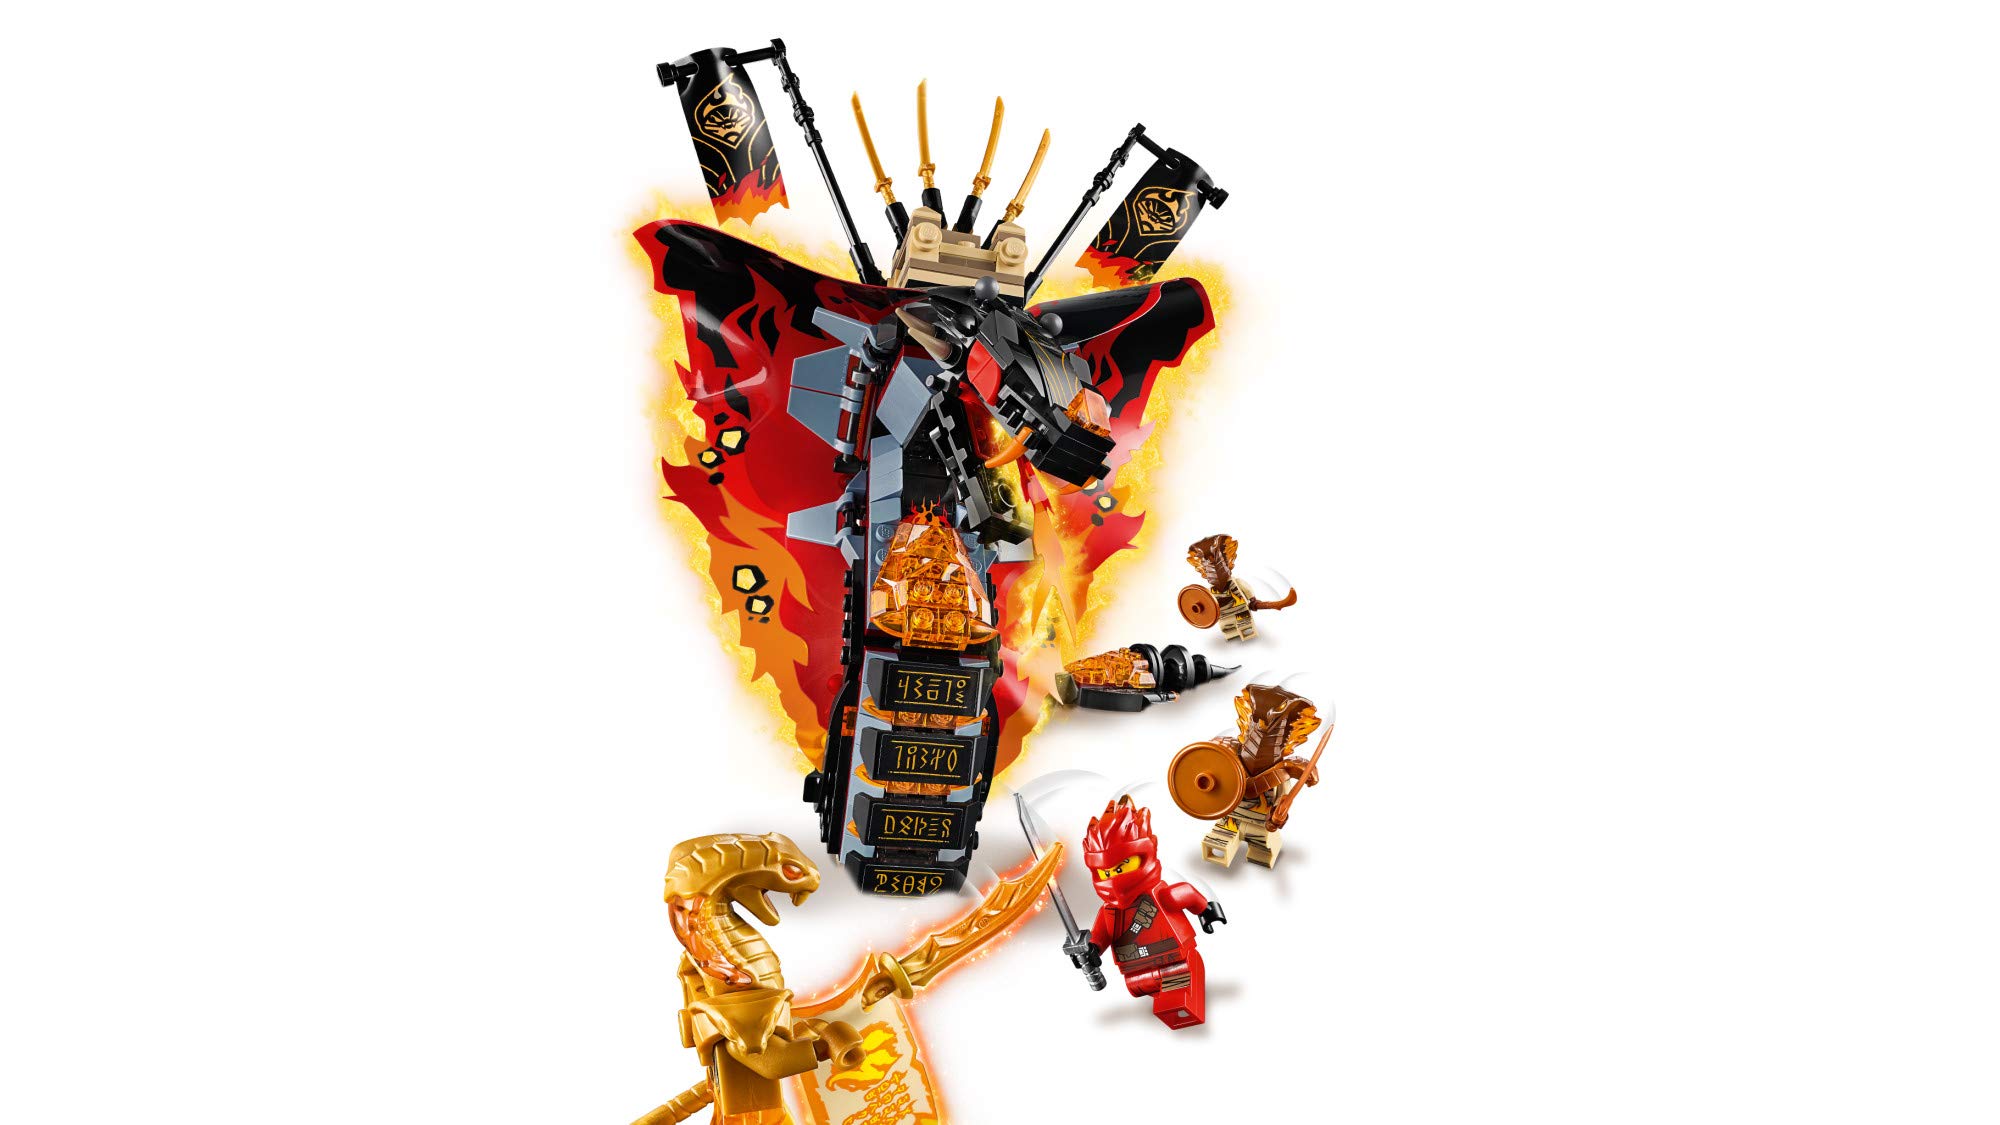 LEGO NINJAGO Fire Fang 70674 Snake Action Toy Building Set with Stud Shooters and Ninja Minifigures Characters, Perfect for Group Play (463 Pieces)